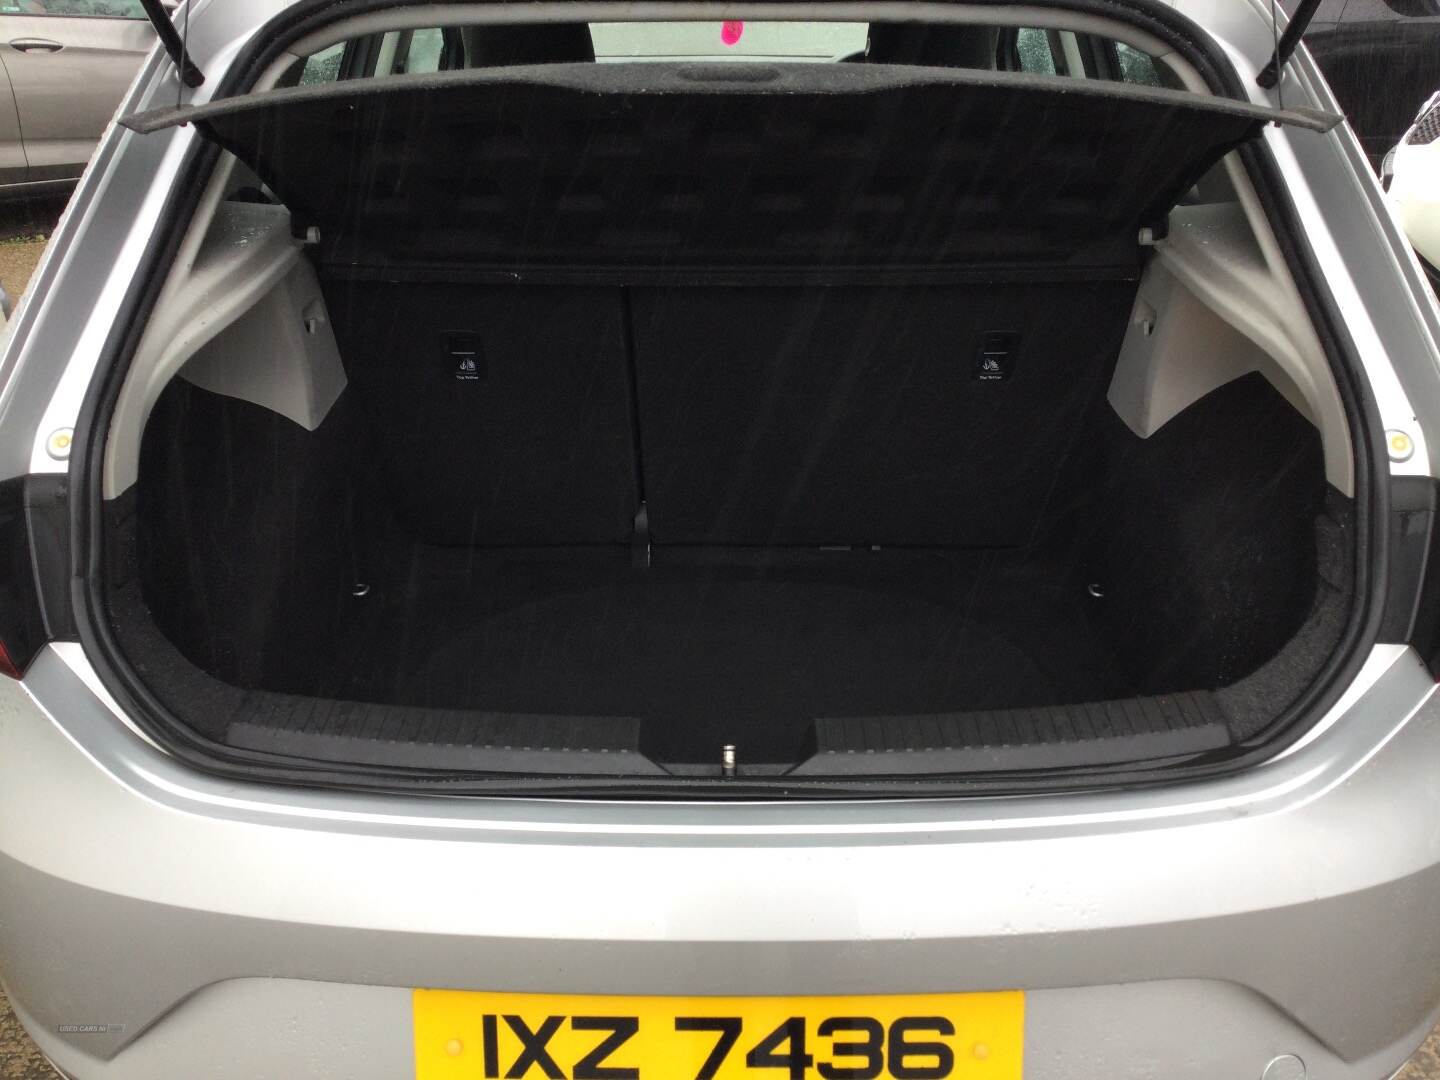 Seat Leon 1.6 TDI SE in Derry / Londonderry